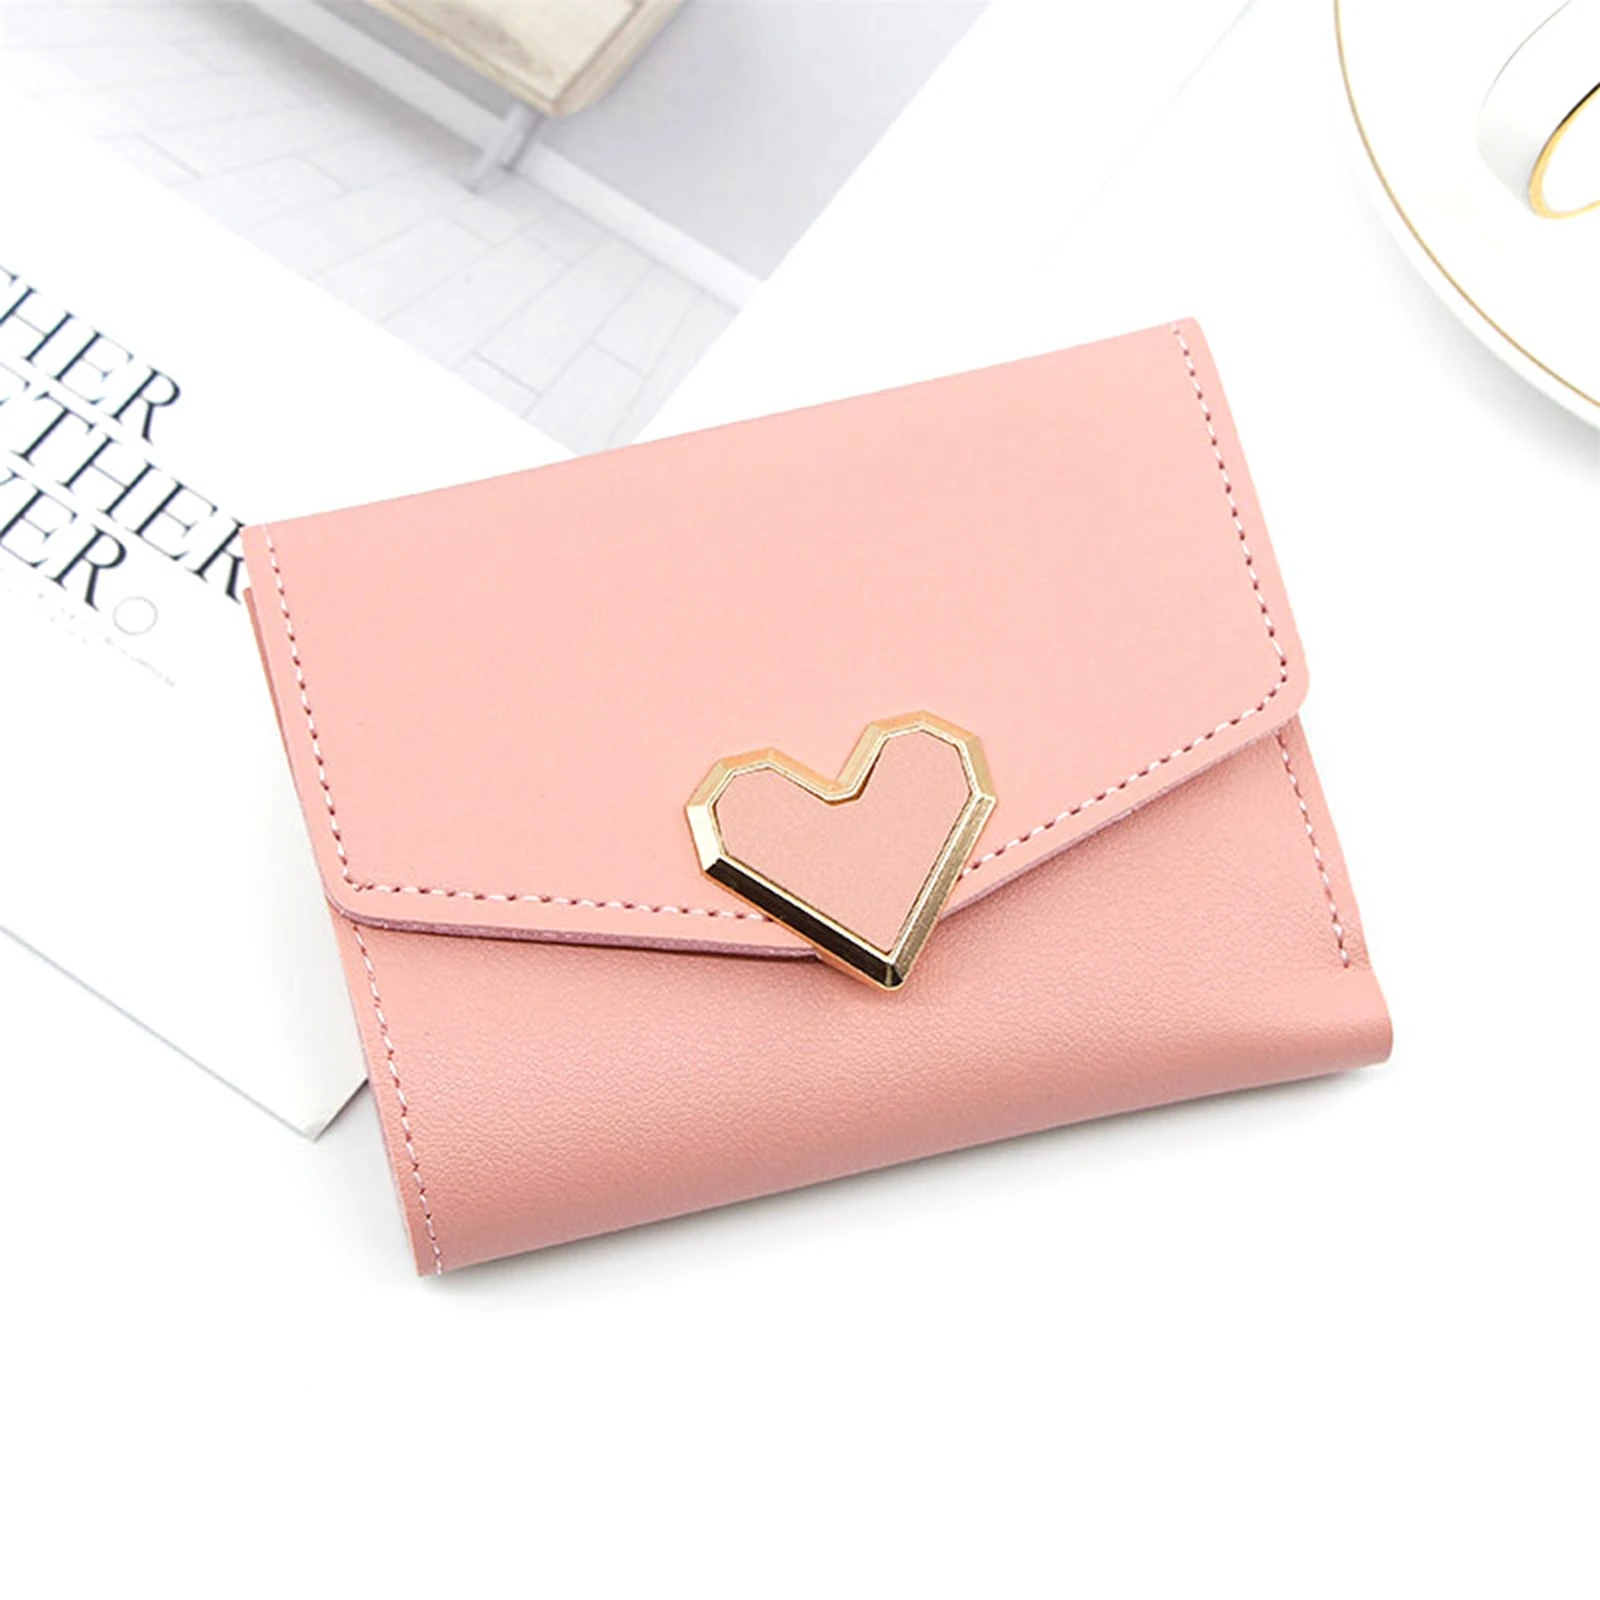 Women's Coin Purse Ladies Compact Leather Foldable Short Wallet Clutch Bag